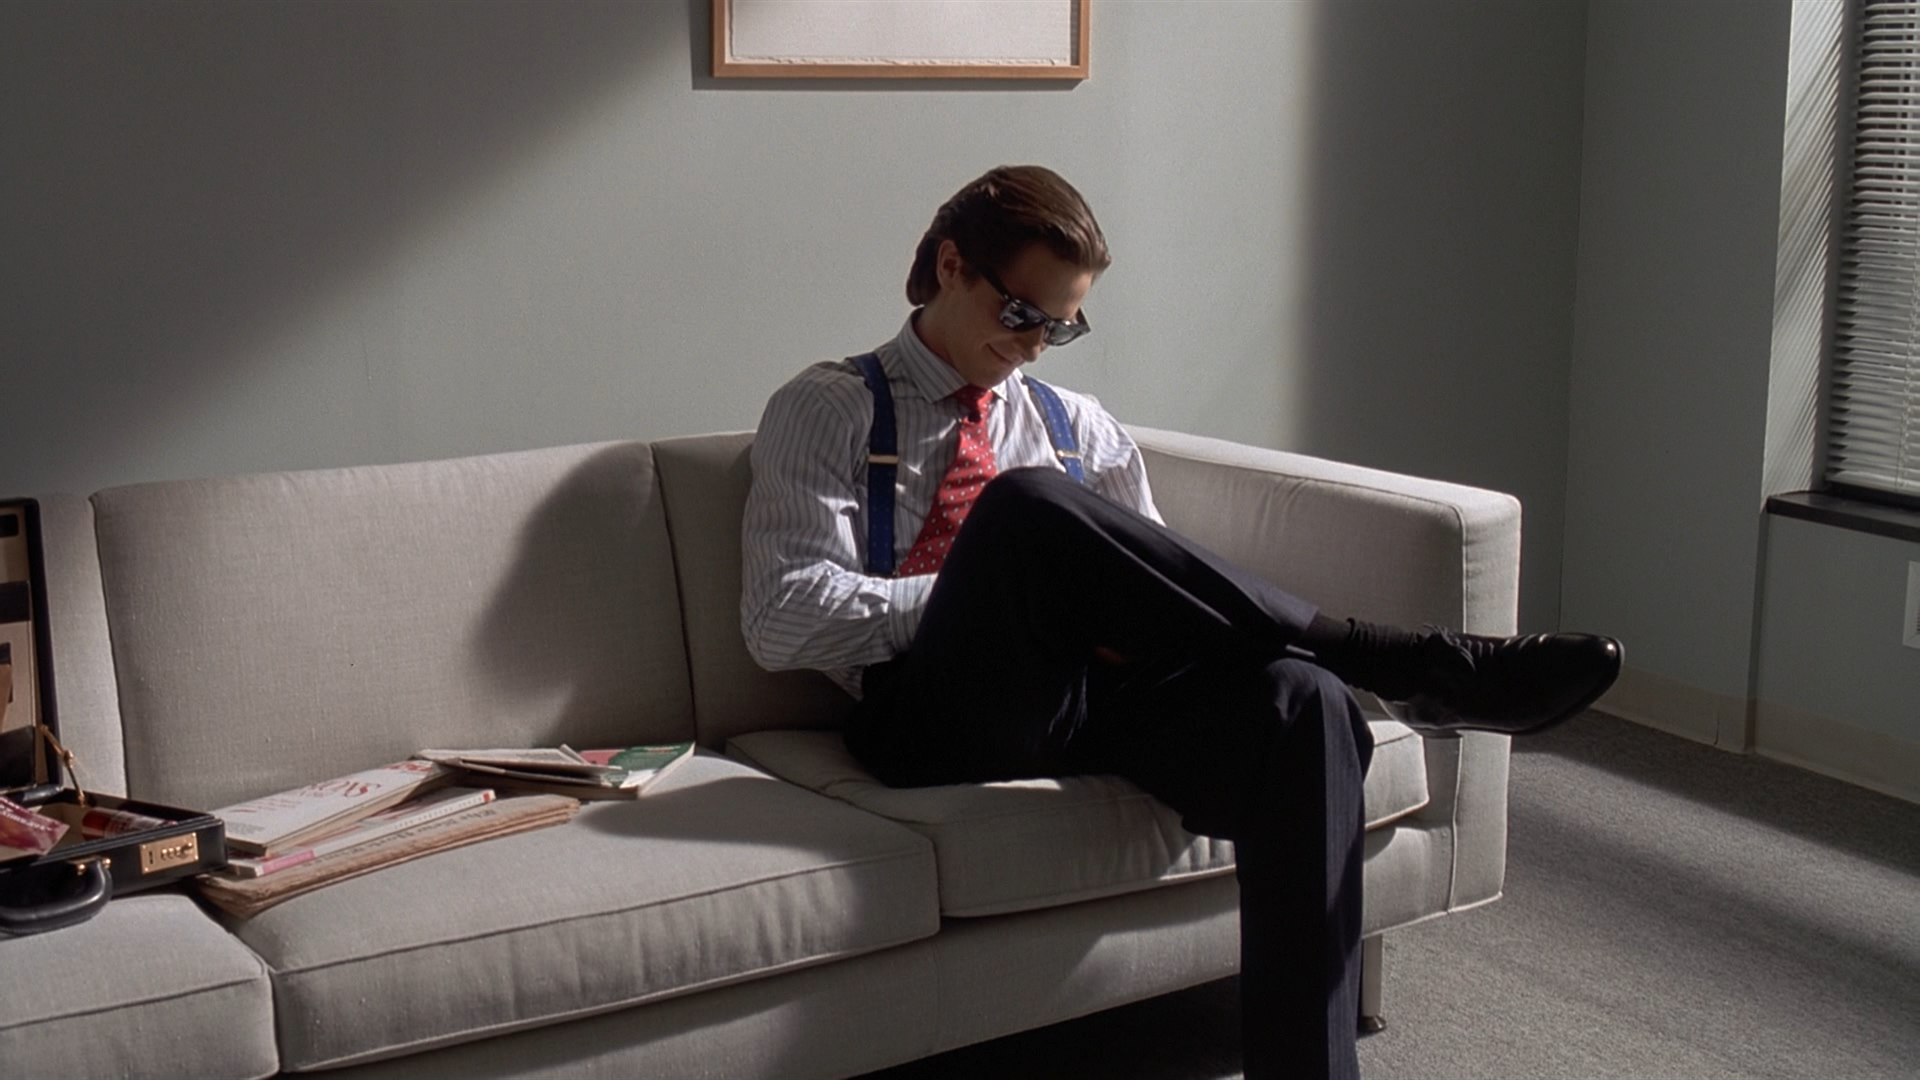 American Psycho Couch Christian Bale Wallpaper:1920x1080